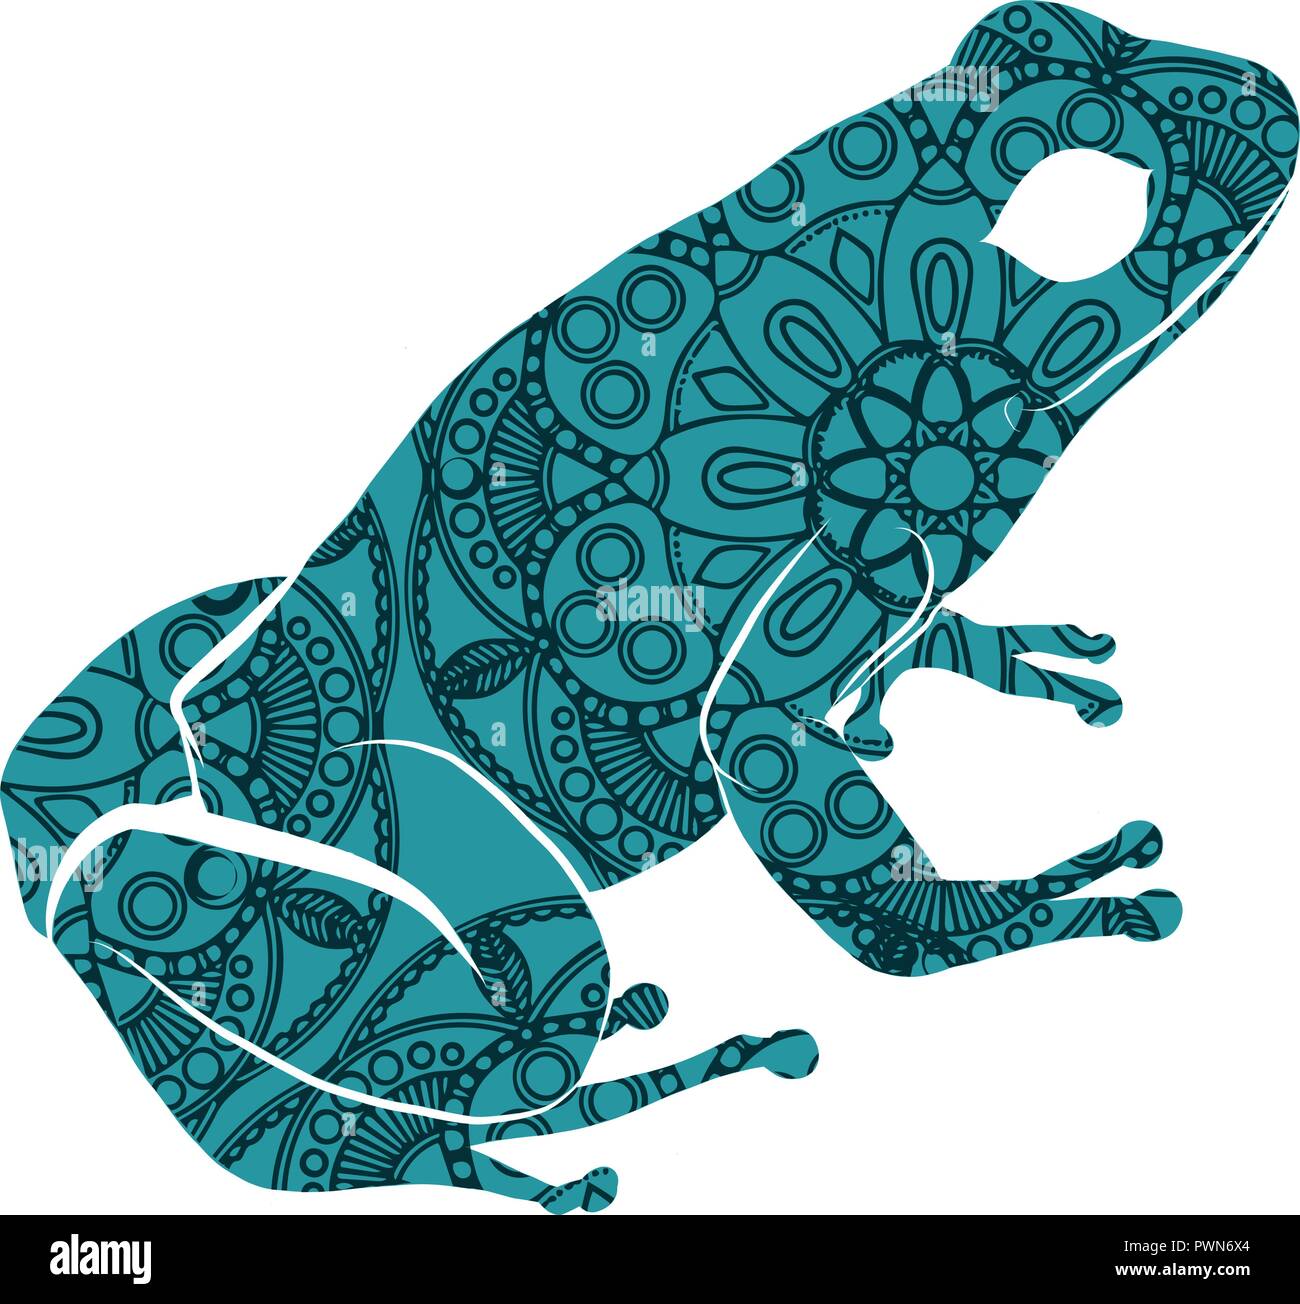 drawn ornamental doodle frog illustration with zentangle ornaments Stock Vector